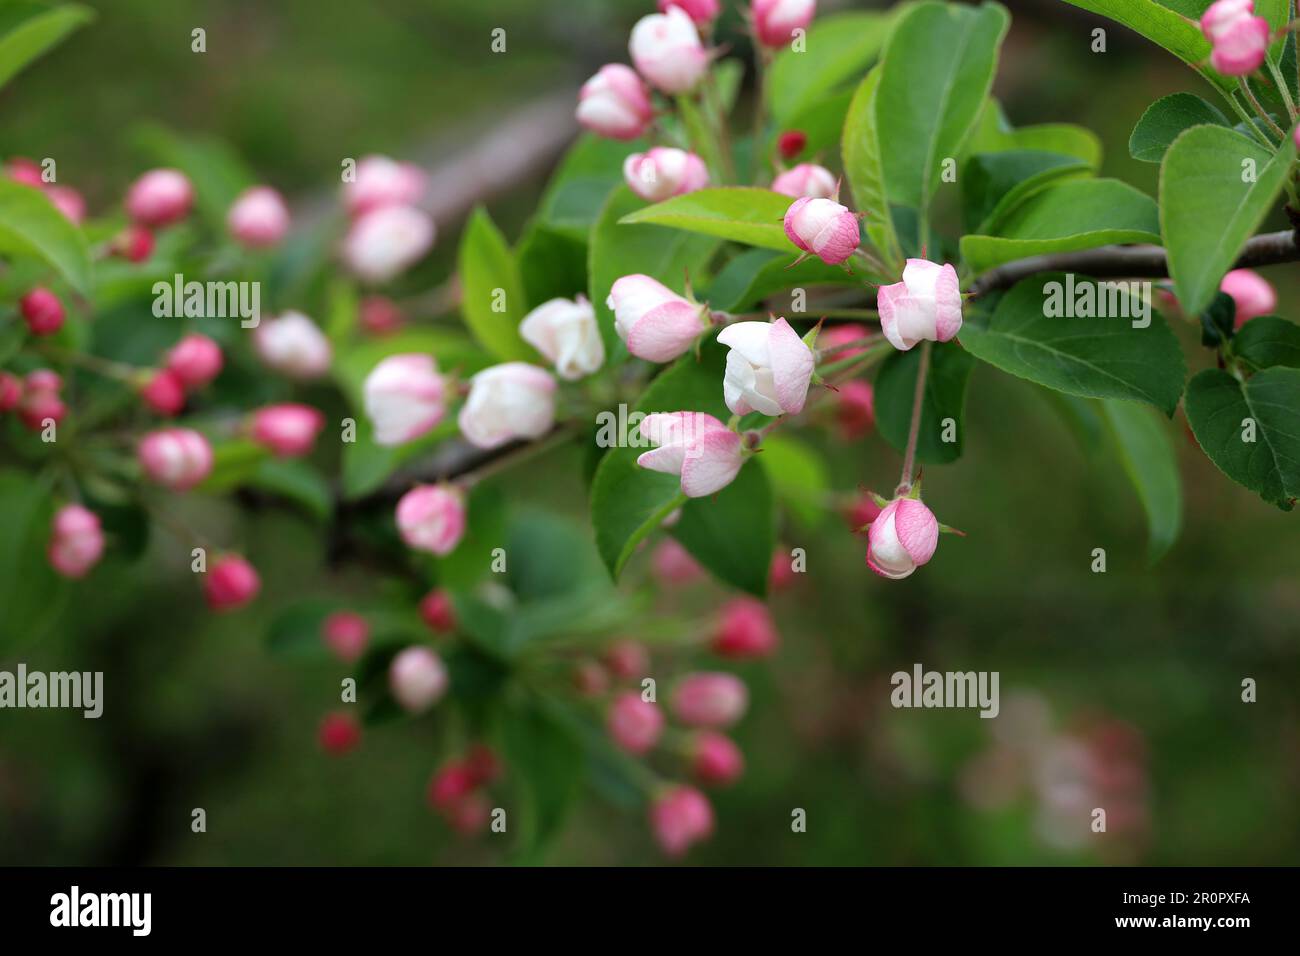 Apple blossom on a branch in spring garden. Pink and white buds with green leaves Stock Photo